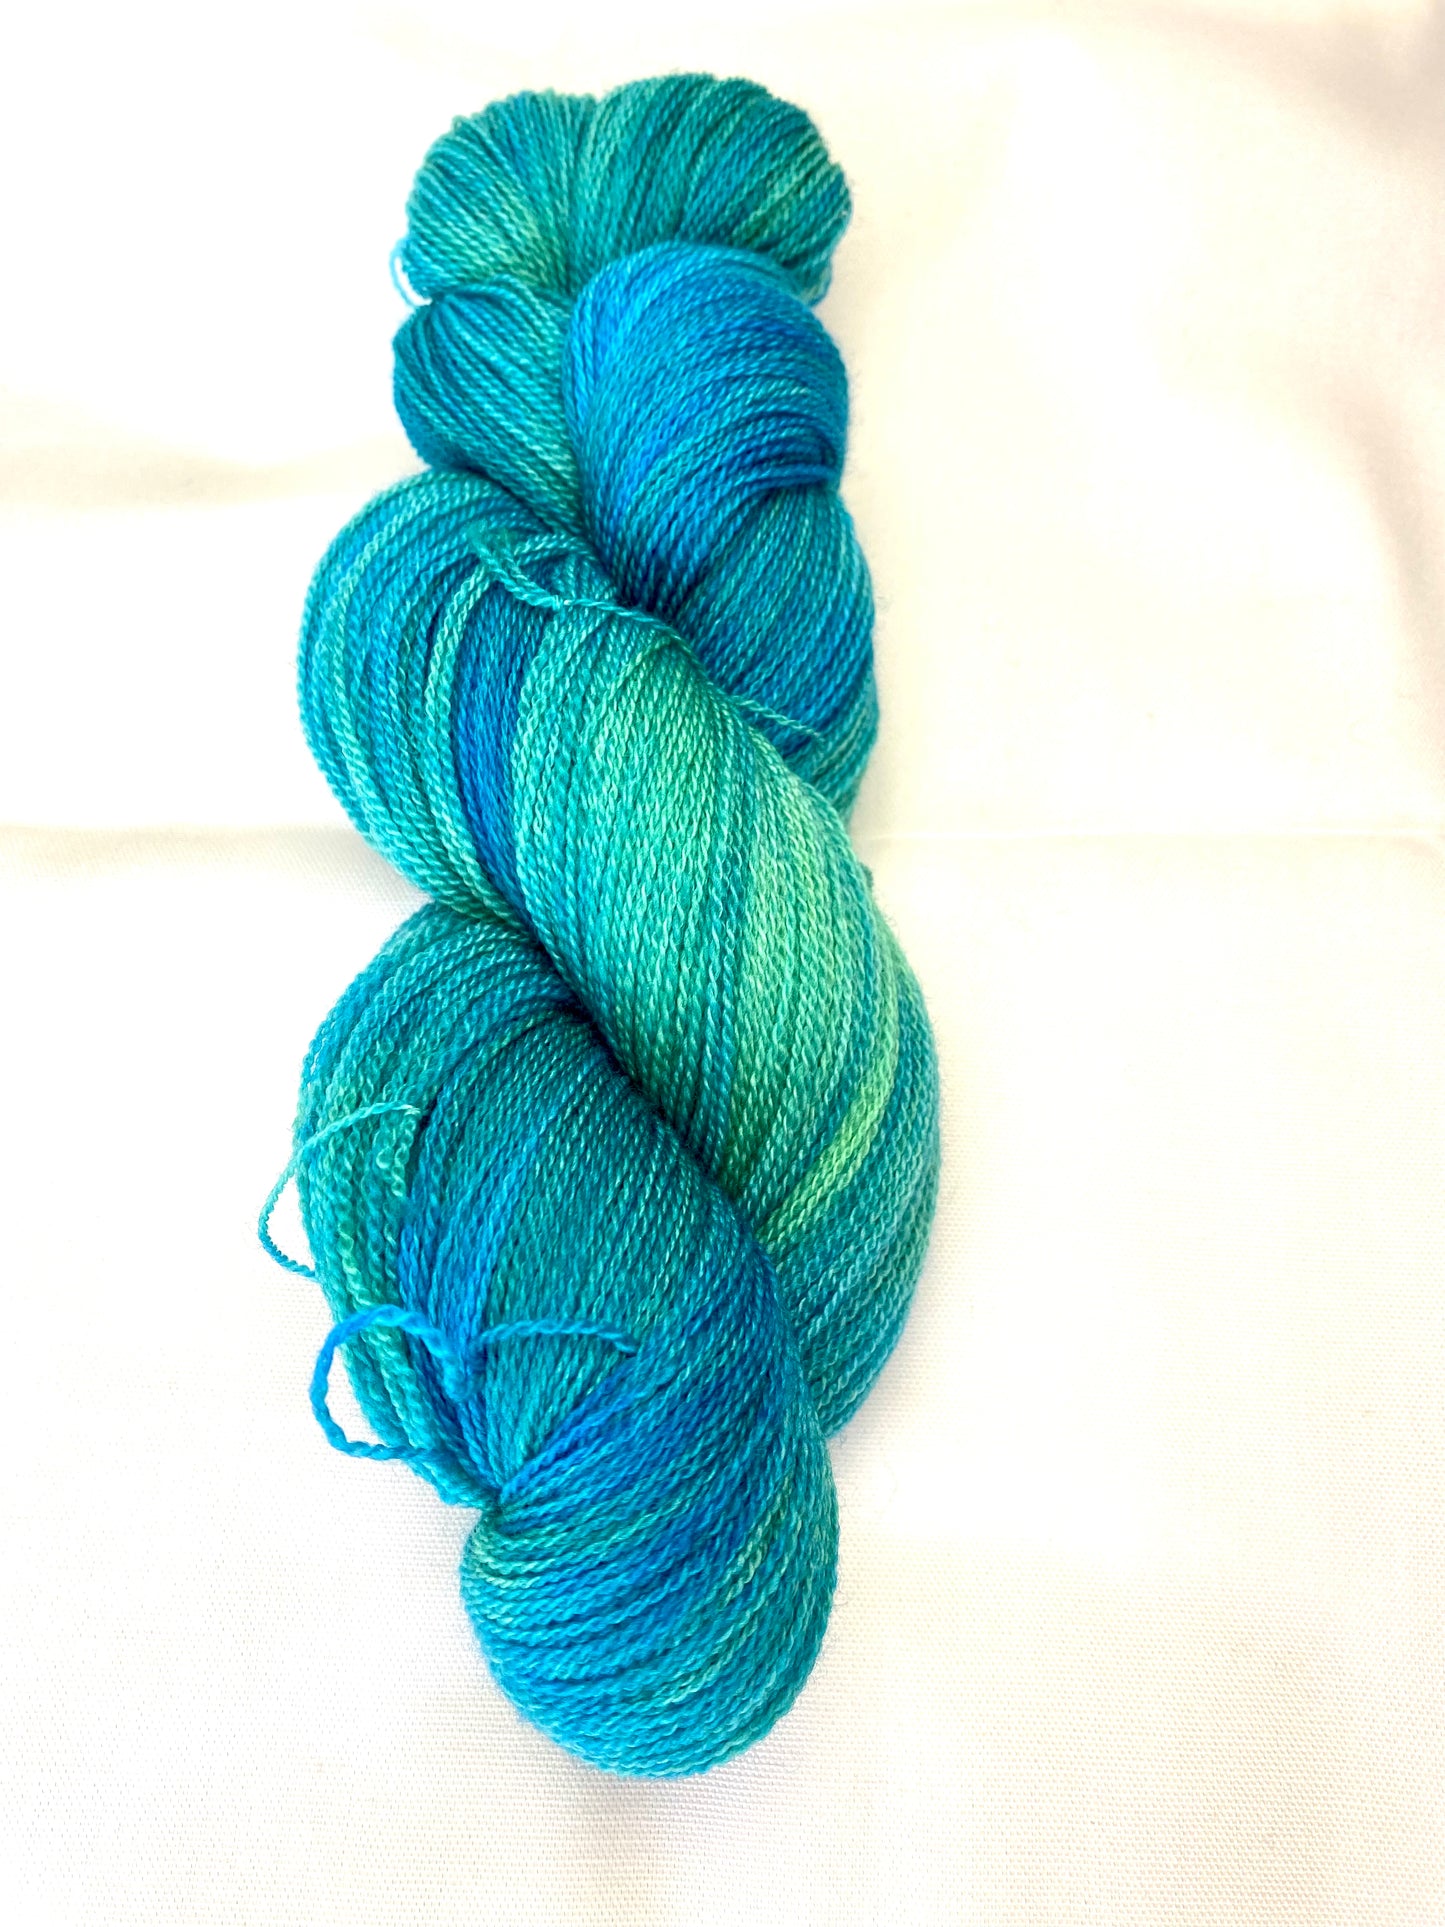 Winter Pillow Lace / North Shore Teal